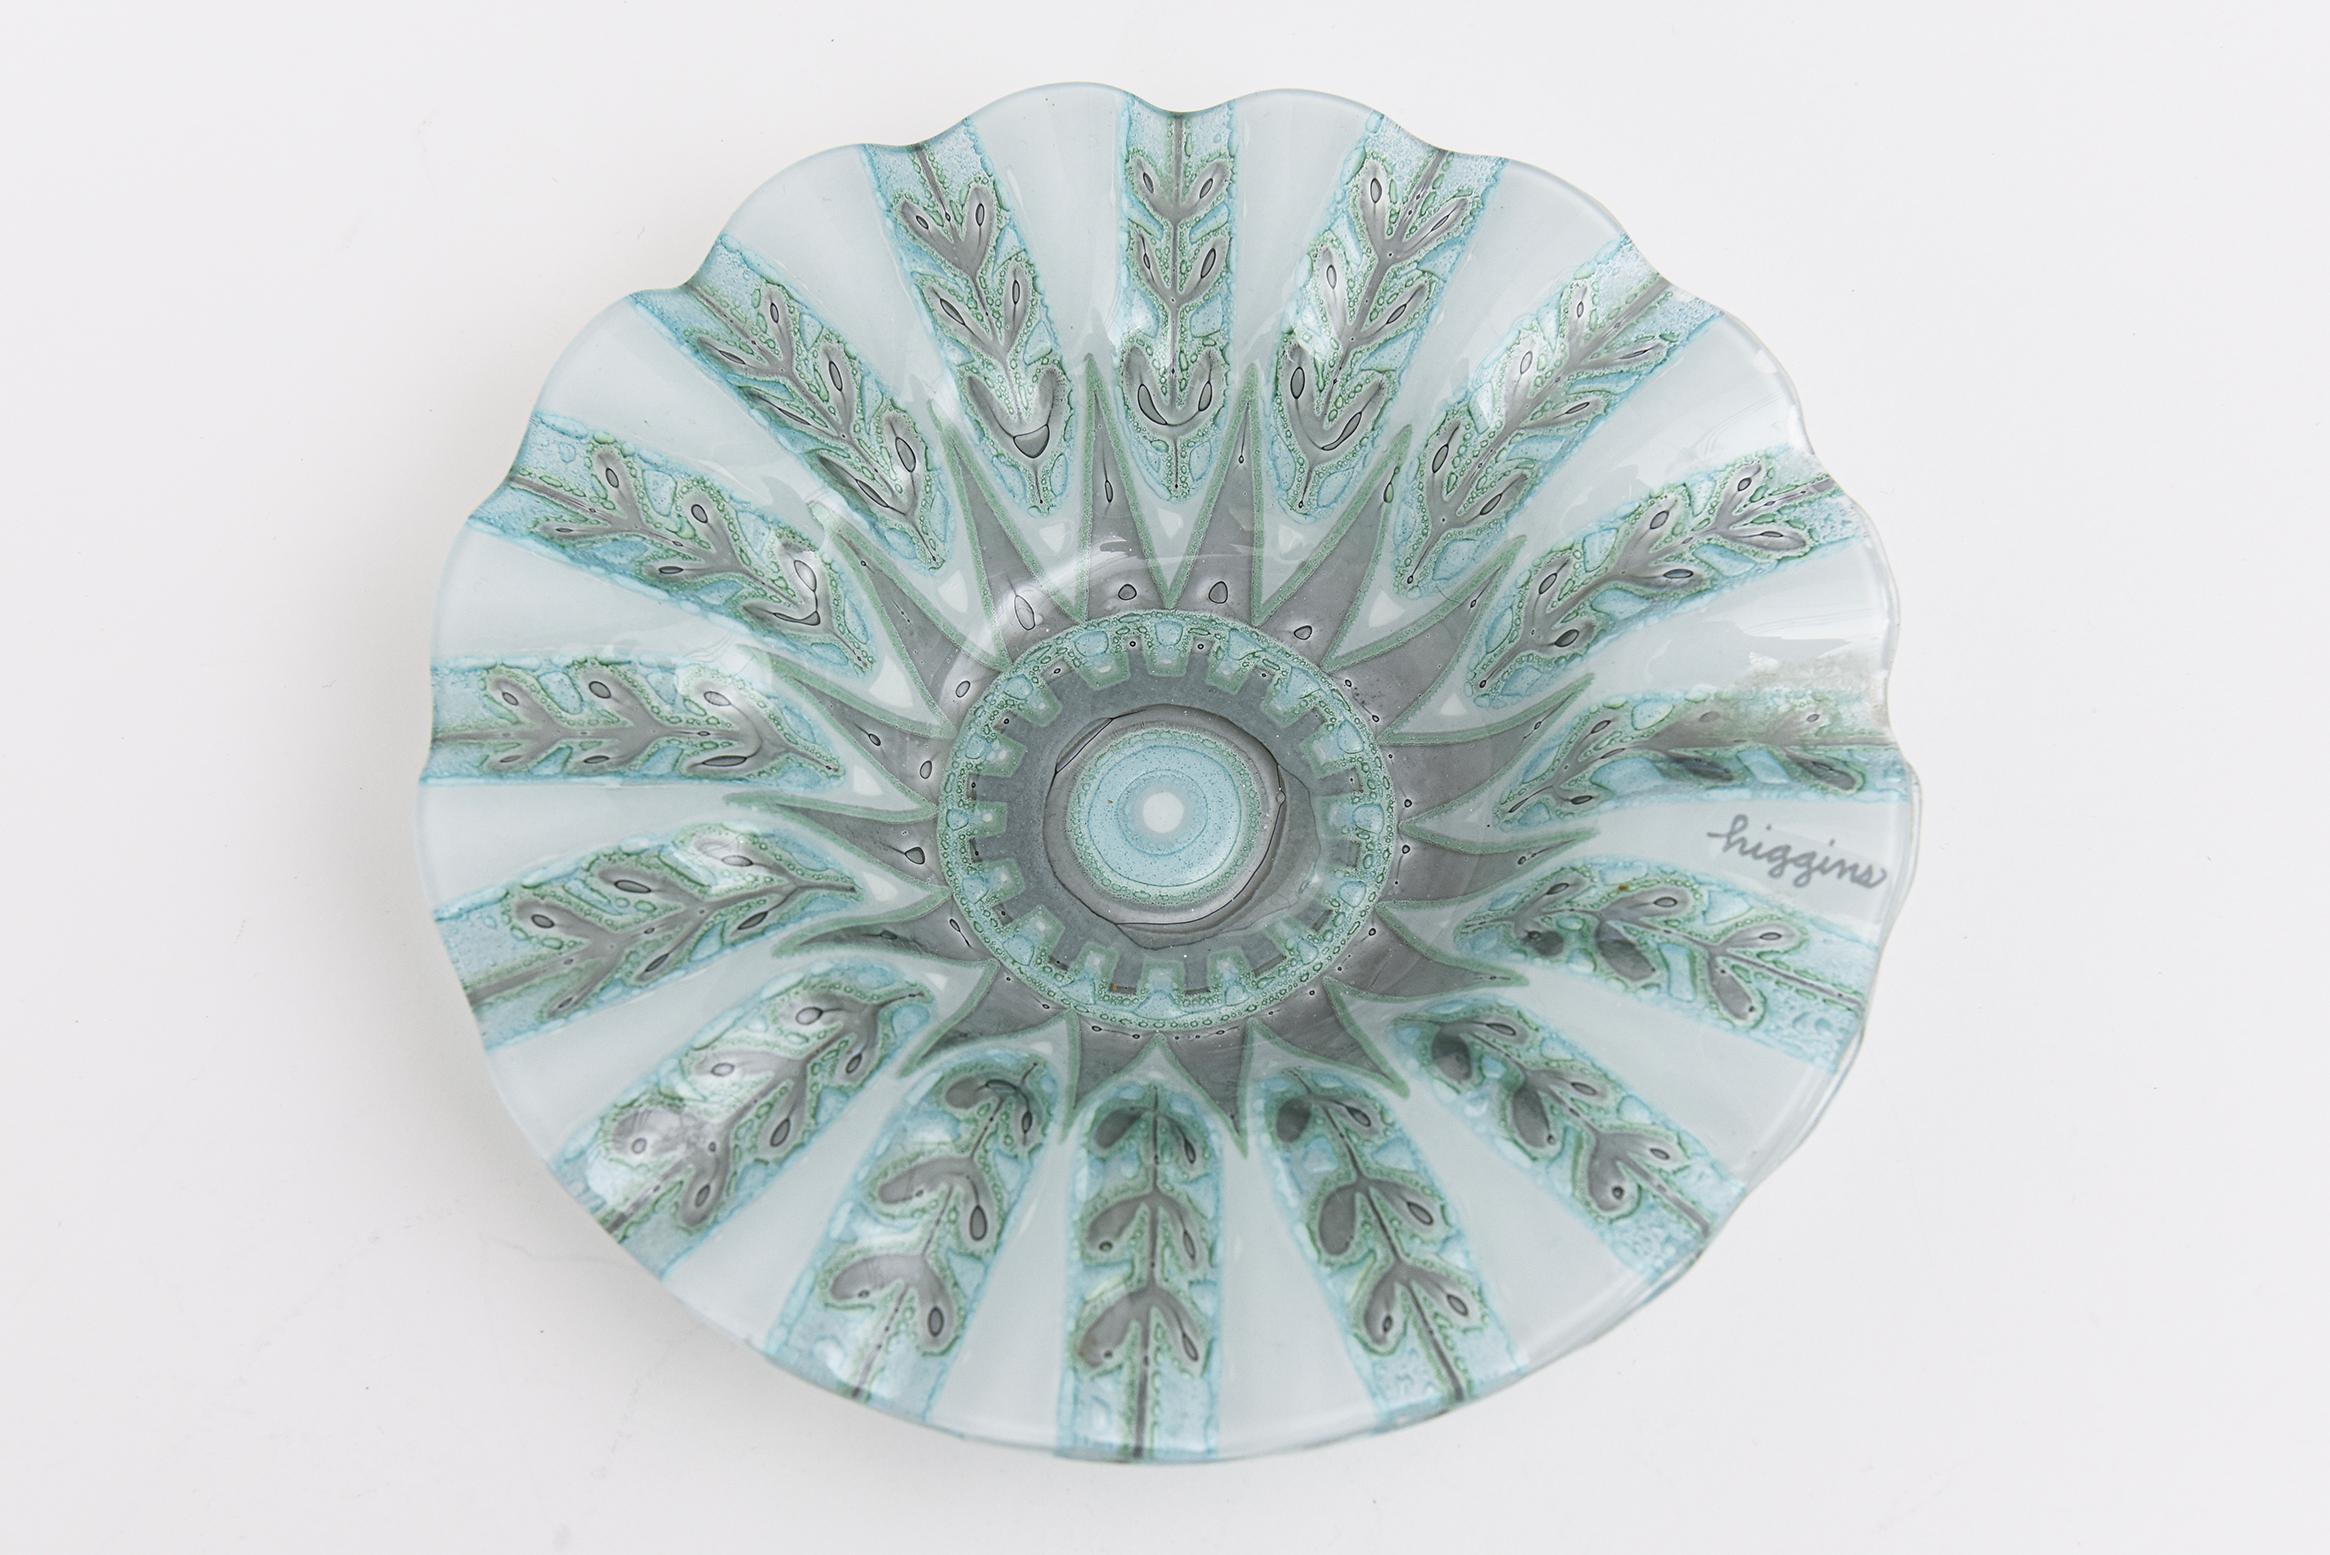 This beautiful signed mid century modern Higgins fused glass bowl has subtle colors of blue green, light turquoise and a gray silver with forms of ferns and foliage. it has a ruffled dimpled form with designs of a repeated leaf throughout. Signed